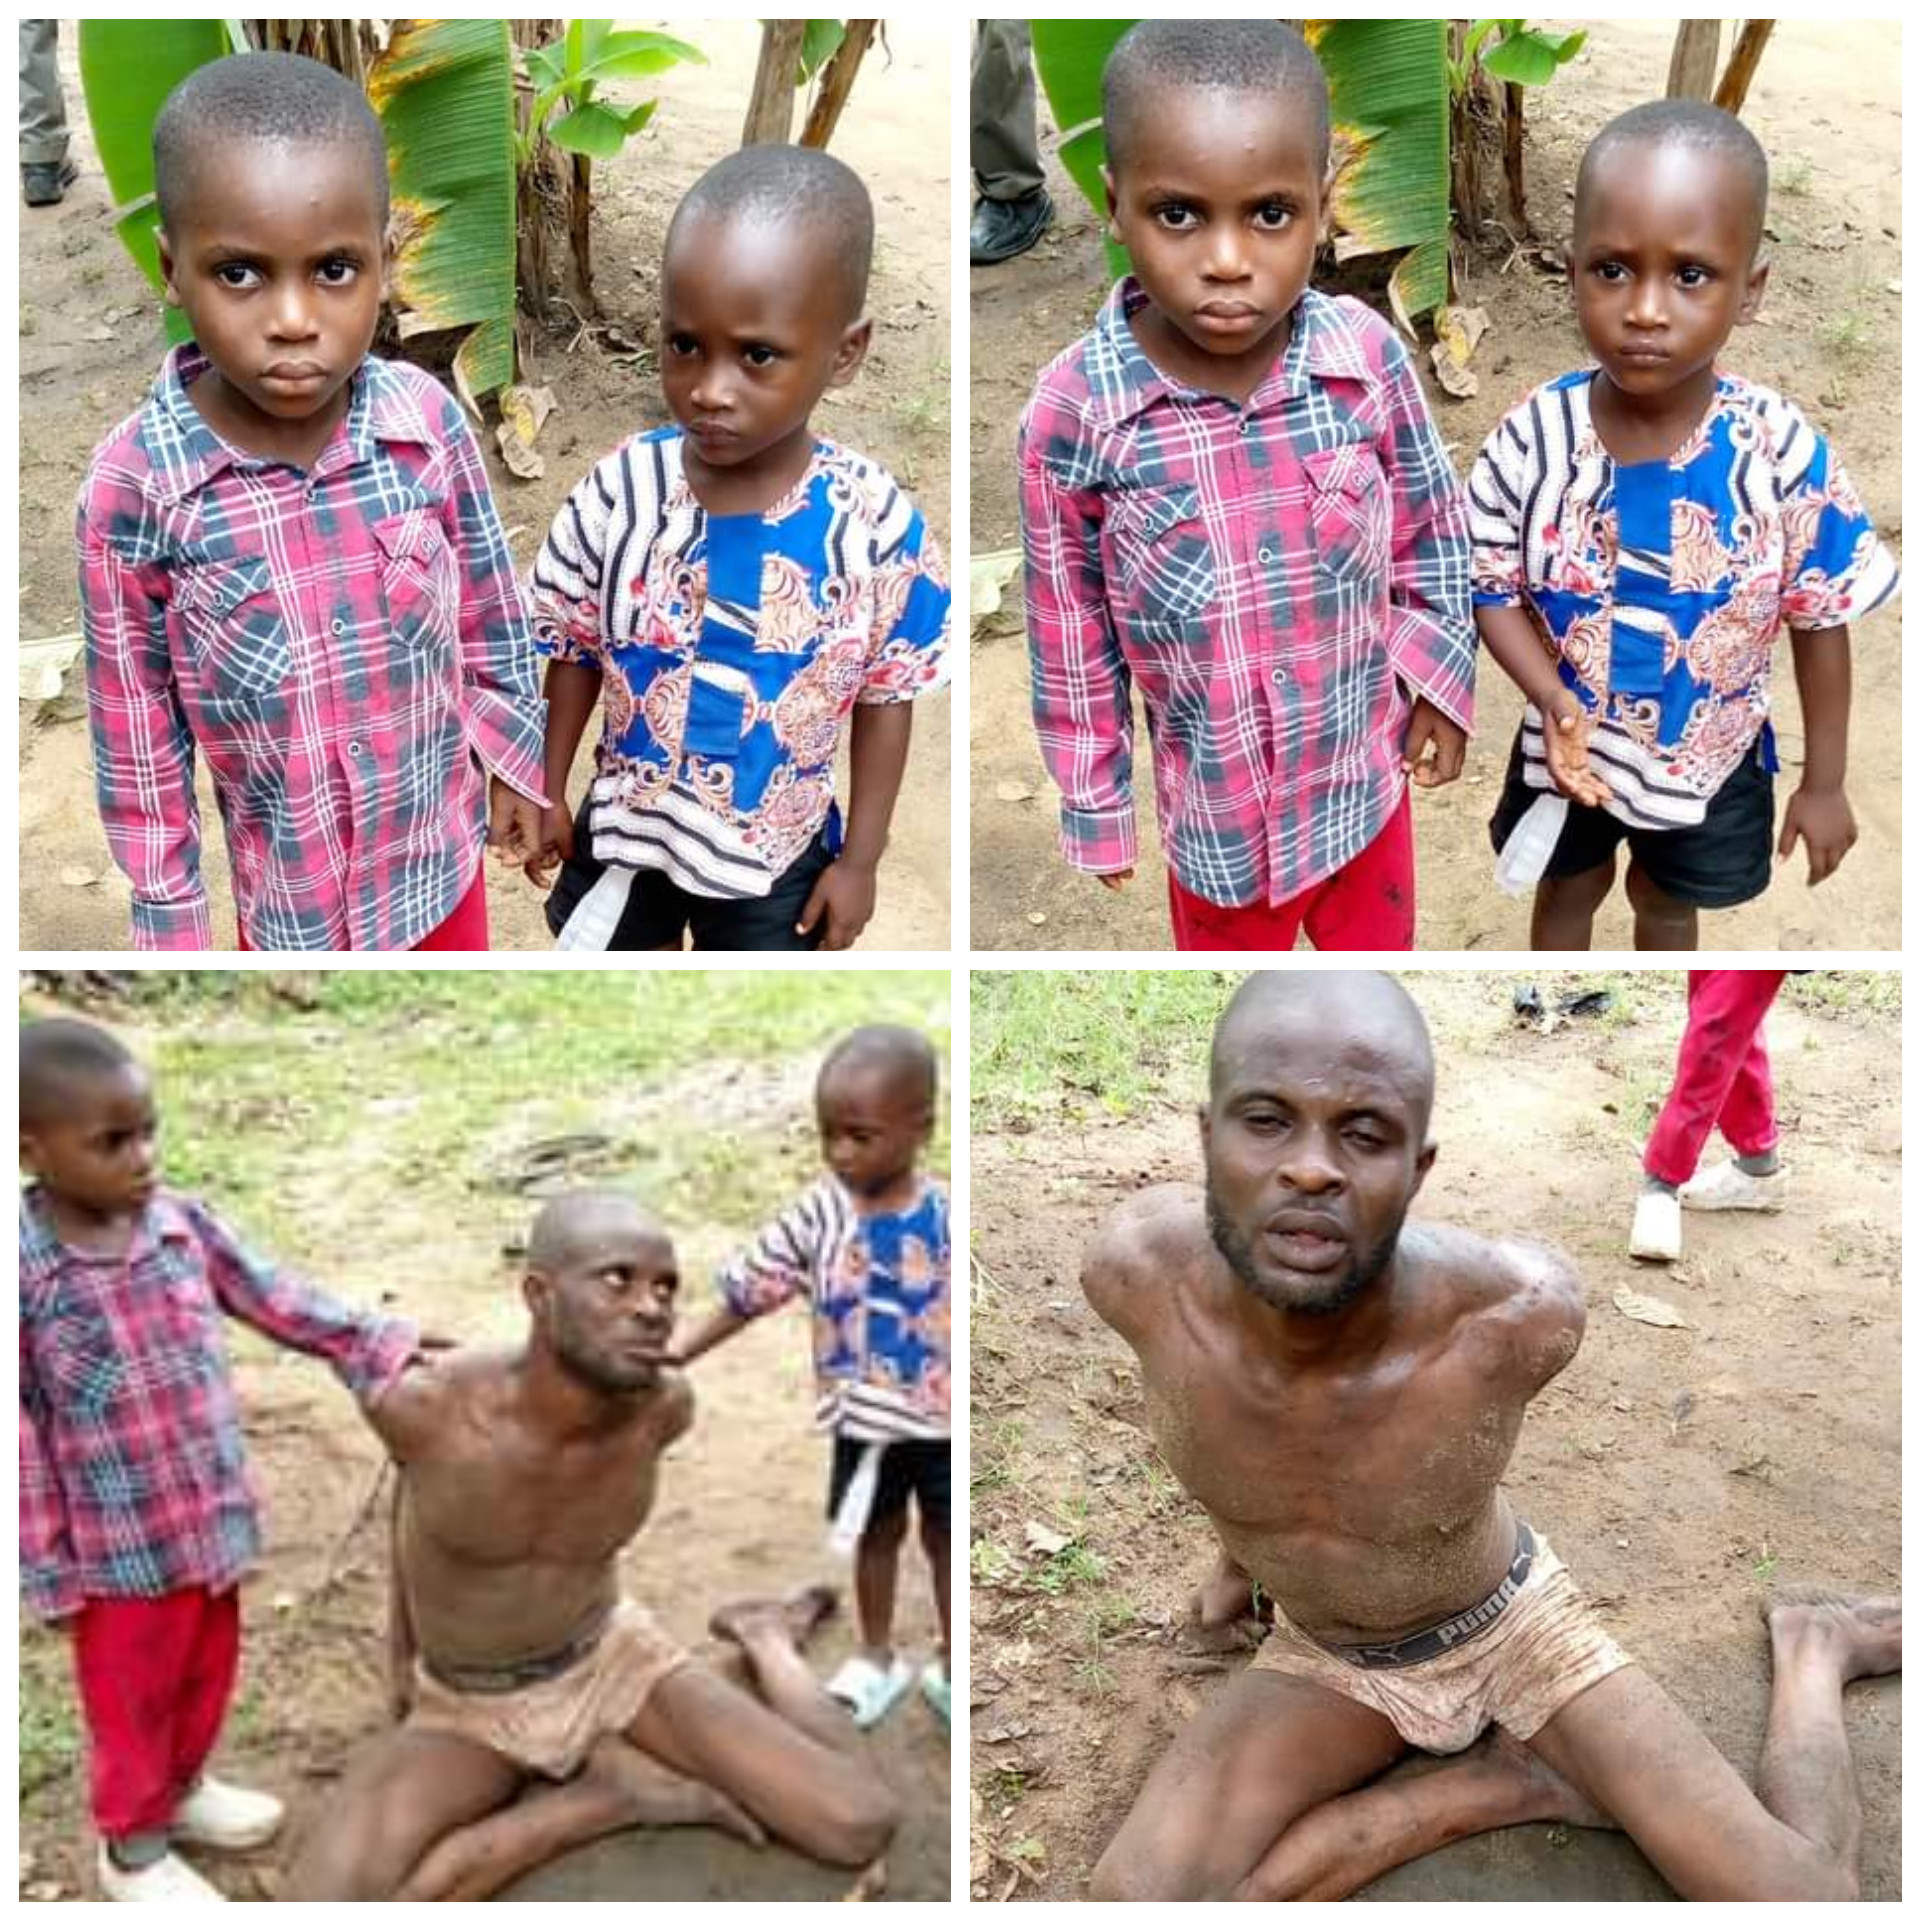 VIGILANTE GROUP NABS SUSPECTED KIDNAPPER, RESCUE TWO ABDUCTED CHILDREN IN RIVERS